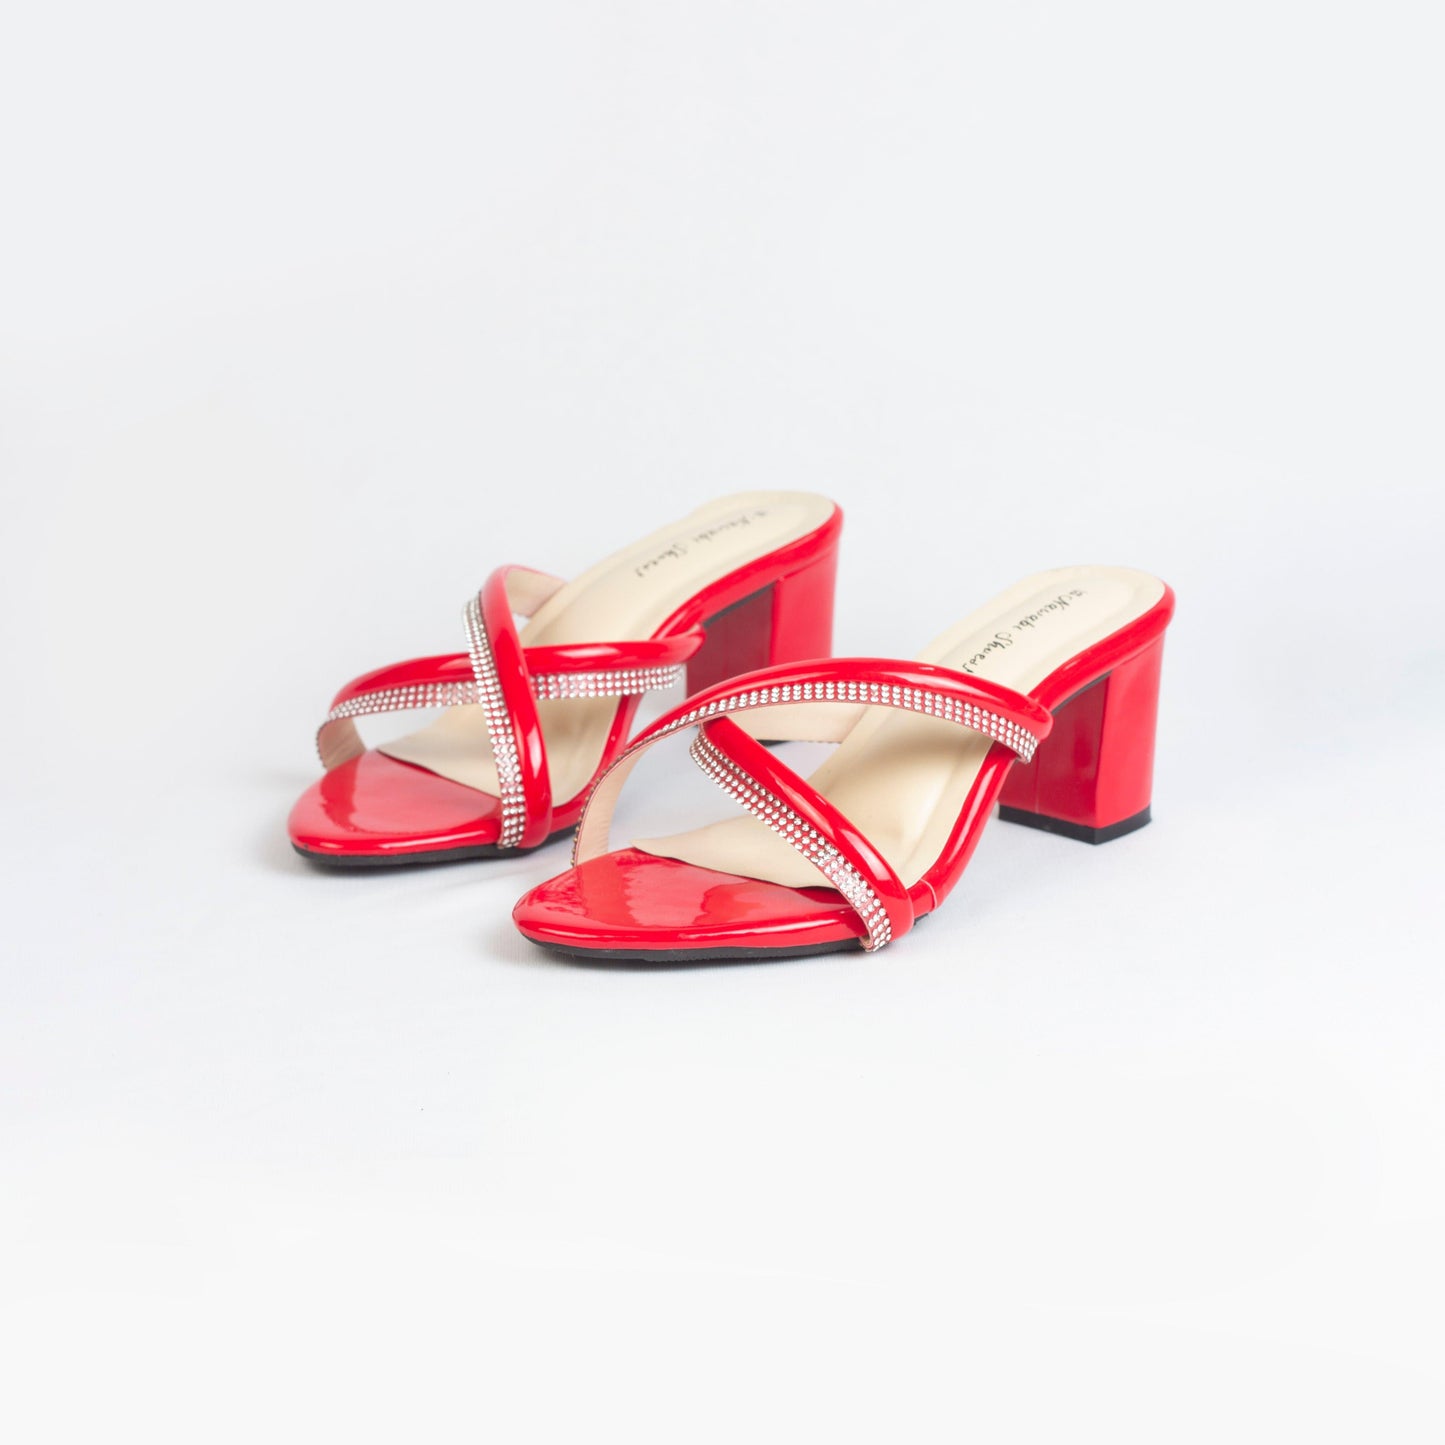 Nawabi Shoes BD Shoes 35 / Red Heels Block for Women: The Must-Have for Your Shoe Collection